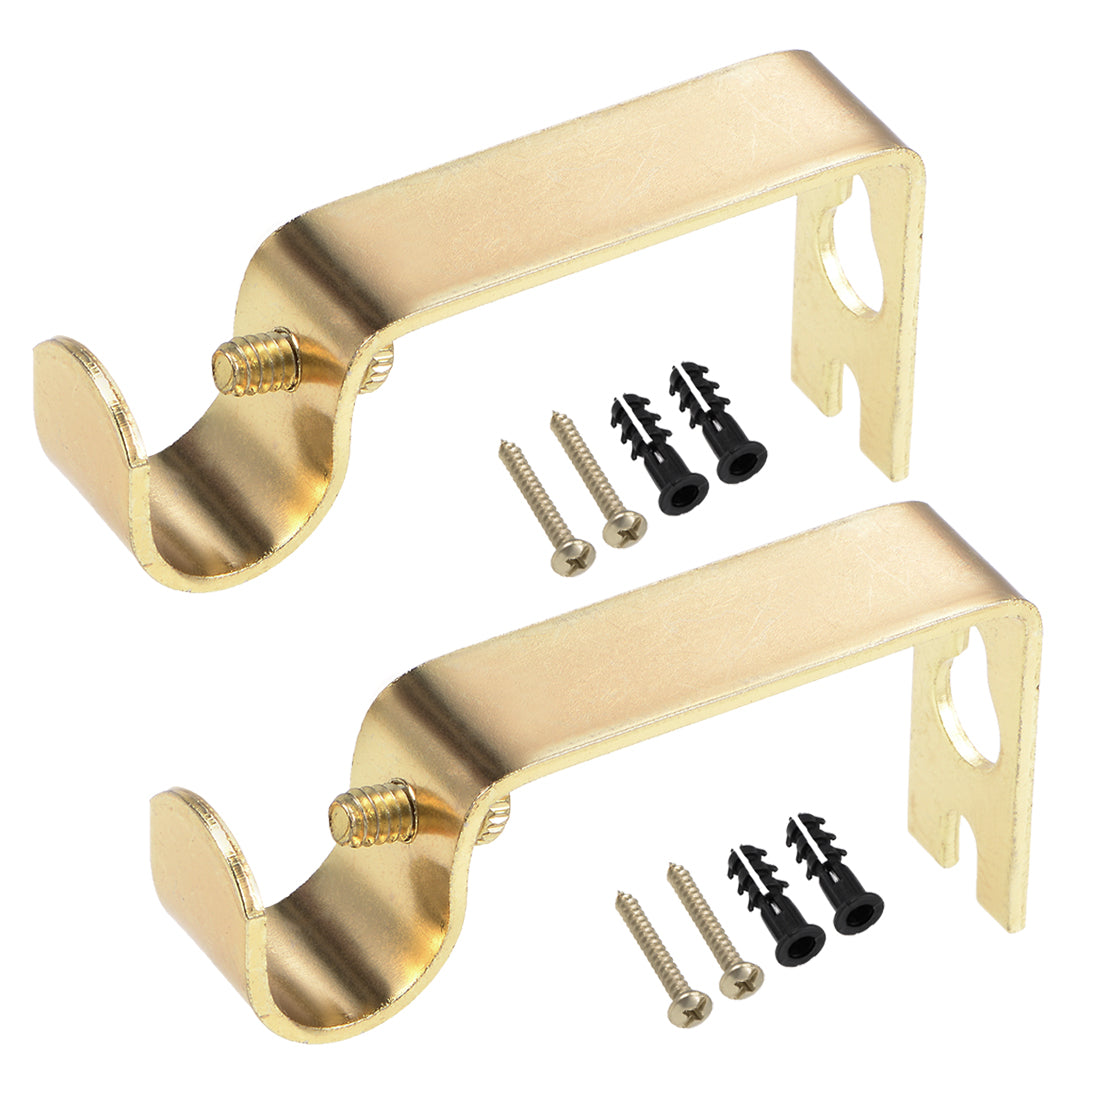 uxcell Uxcell Curtain Rod Bracket Iron Single Holder Support for 16mm Drapery Rod, 73 x 36 x 16mm Gold Tone 6Pcs